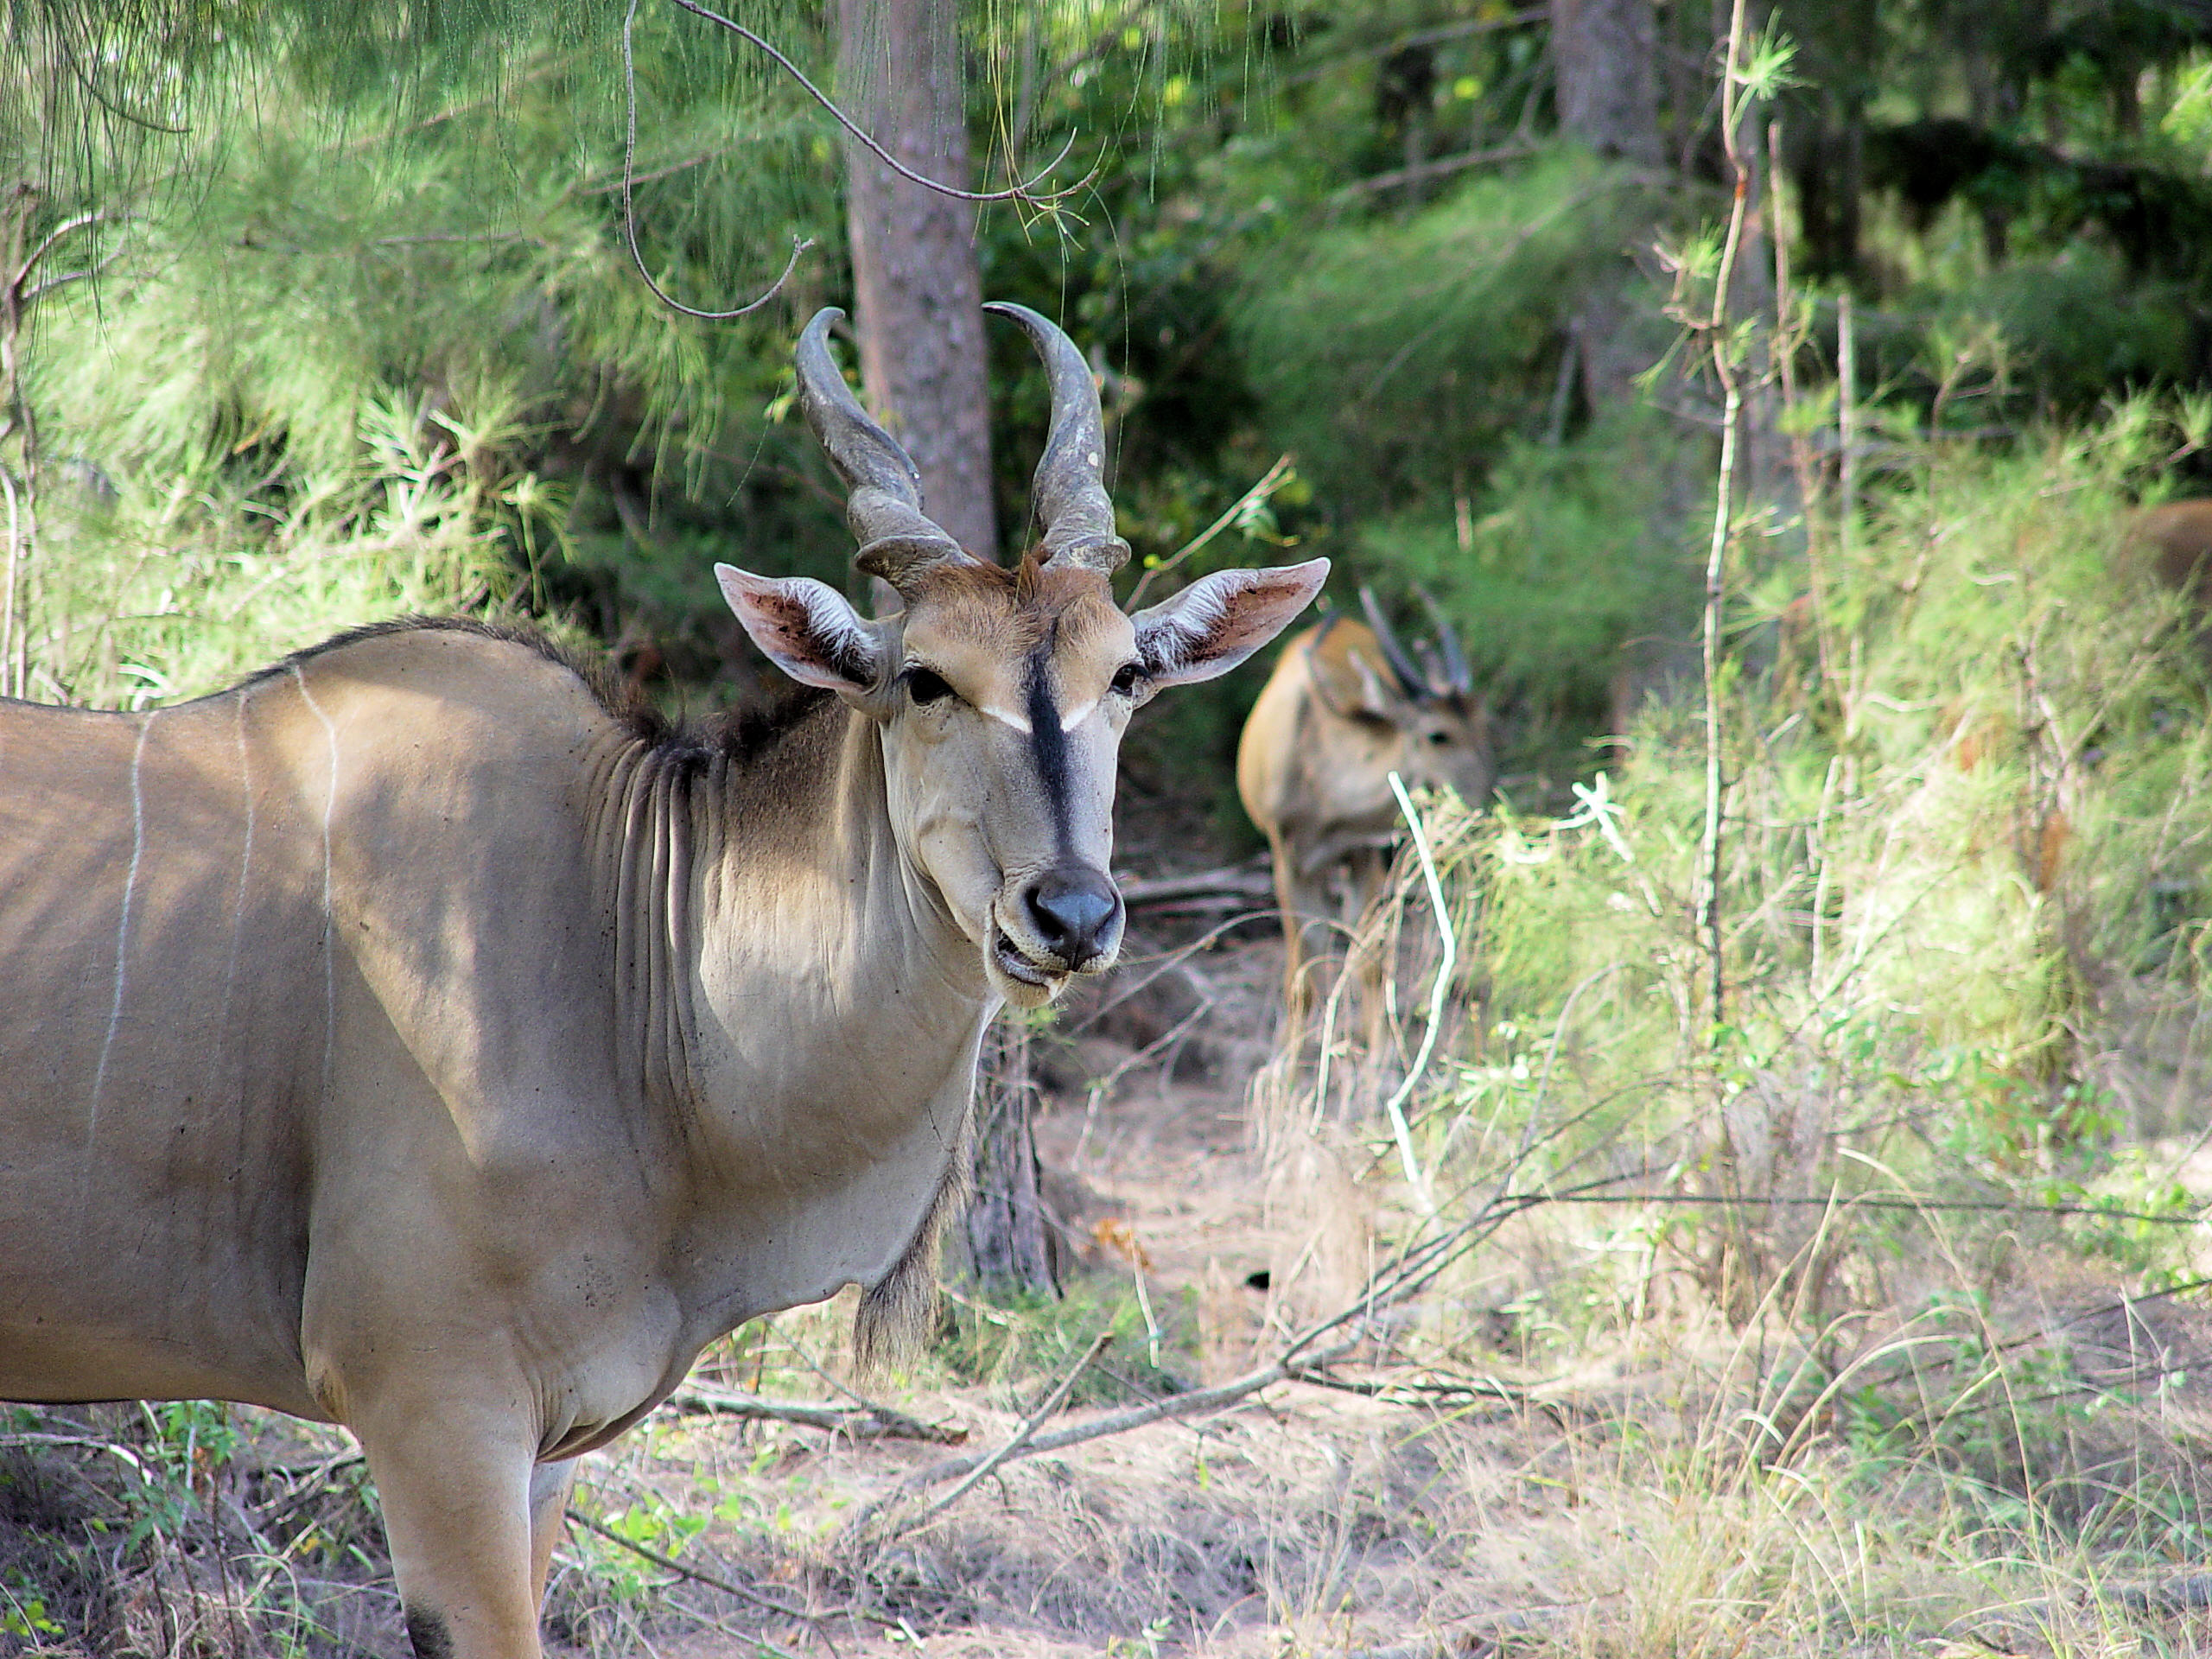 Eland - Africa's Largest Antelope in Mombasa Area Park